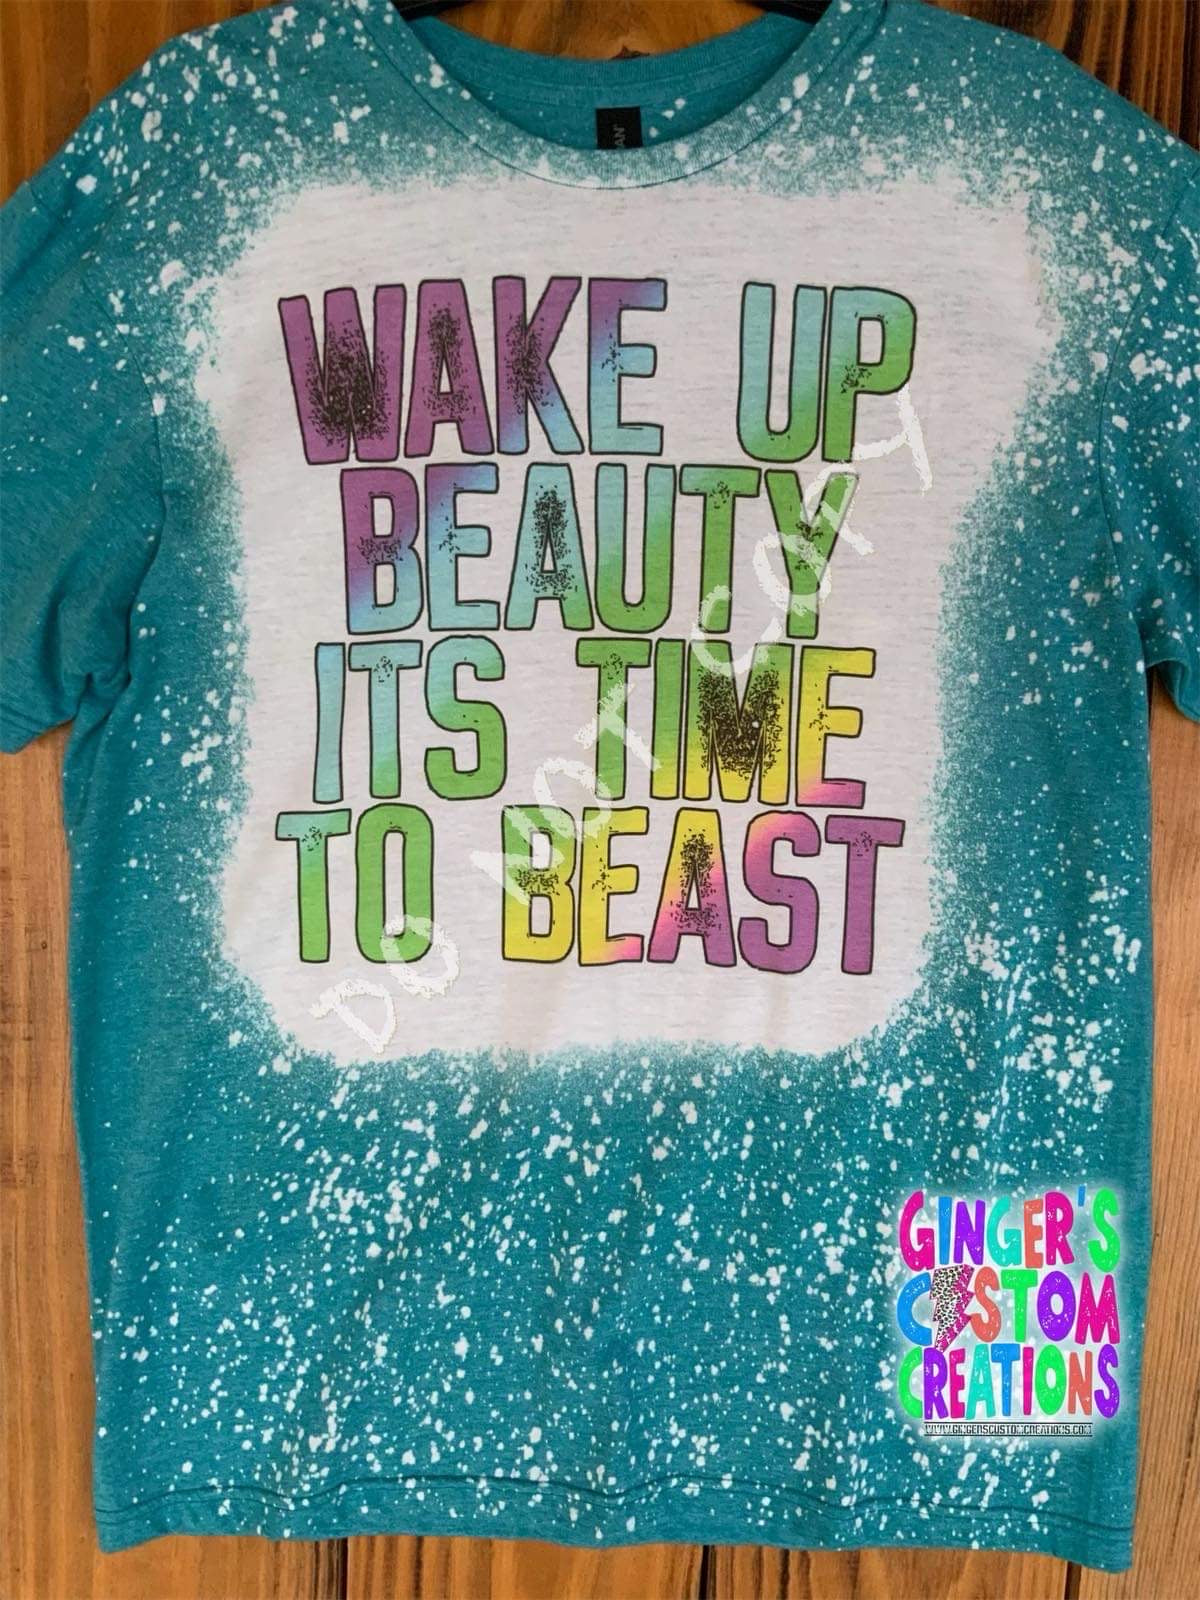 WAKE UP BEAUTY ITS TIME TO BEAST  - BLEACHED SHIRT